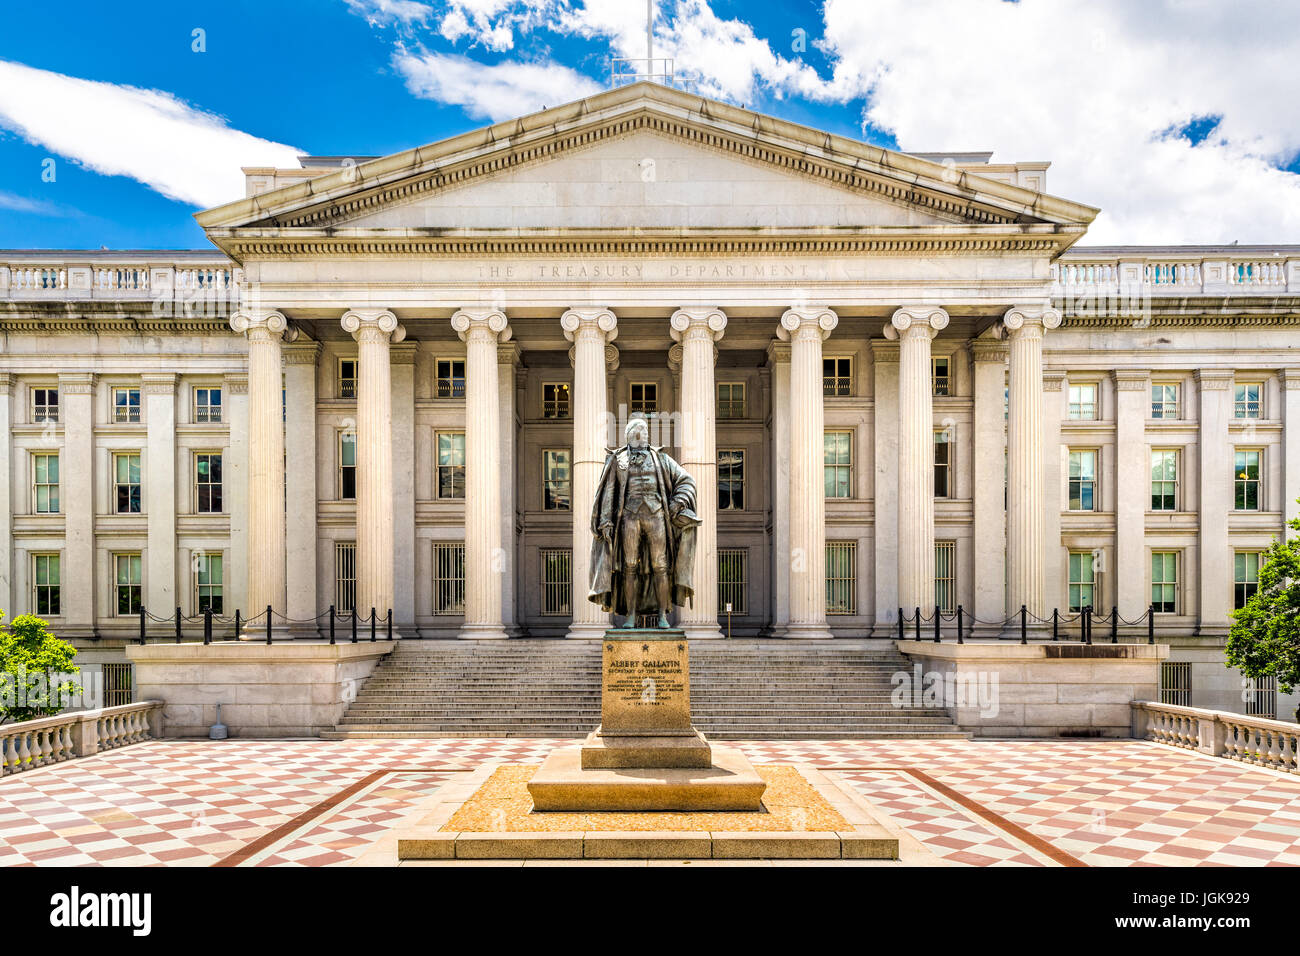 The Treasury Building in Washington D.C. This public building is a National Historic Landmark and the headquarters of the US Department of the Treasur Stock Photo